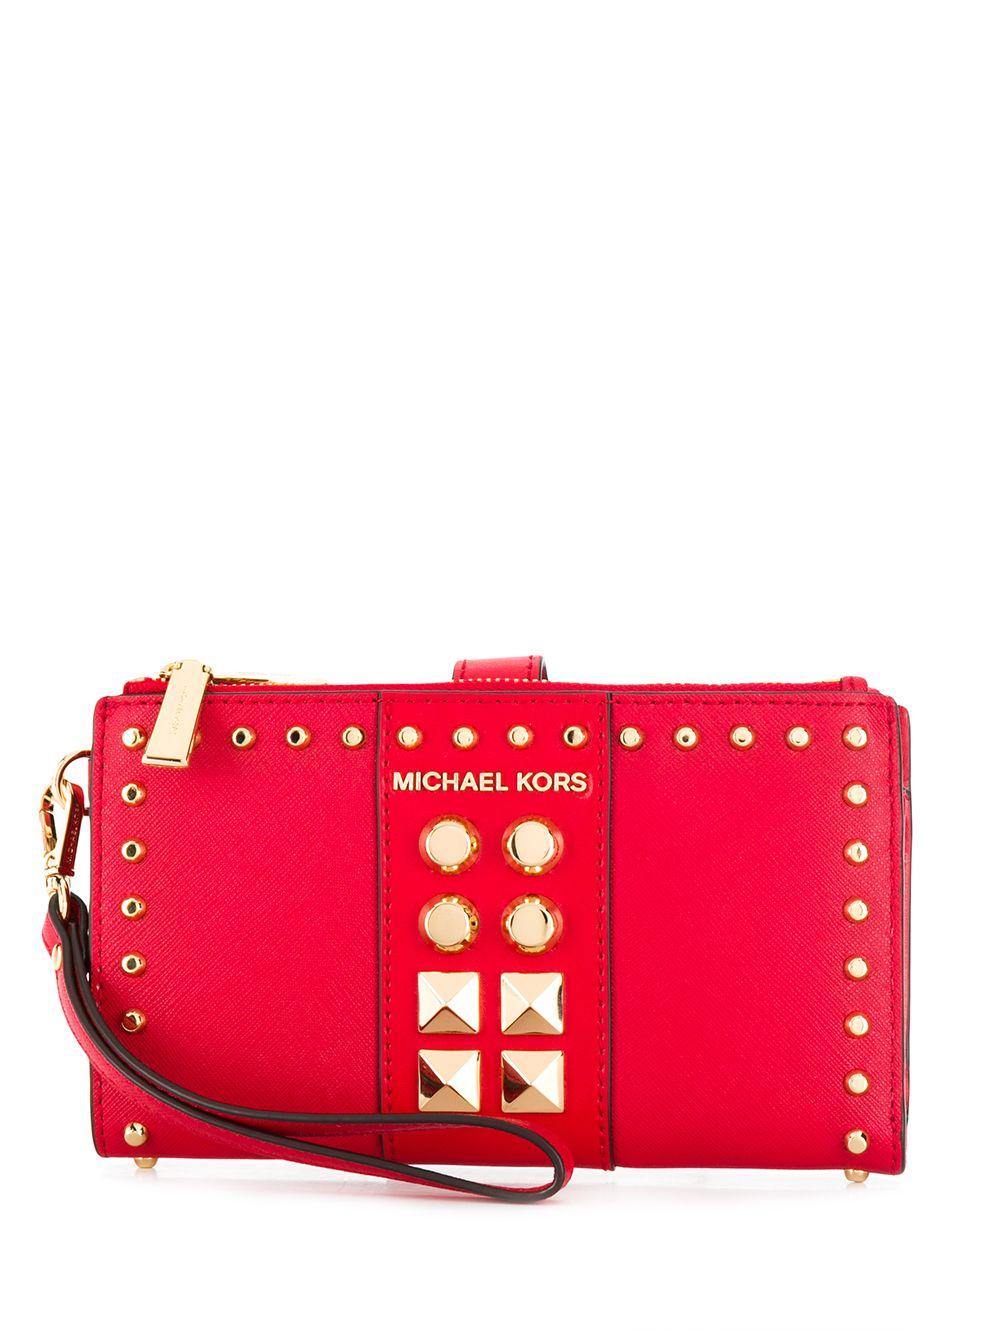 MICHAEL Kors Detail Purse in Red - Lyst